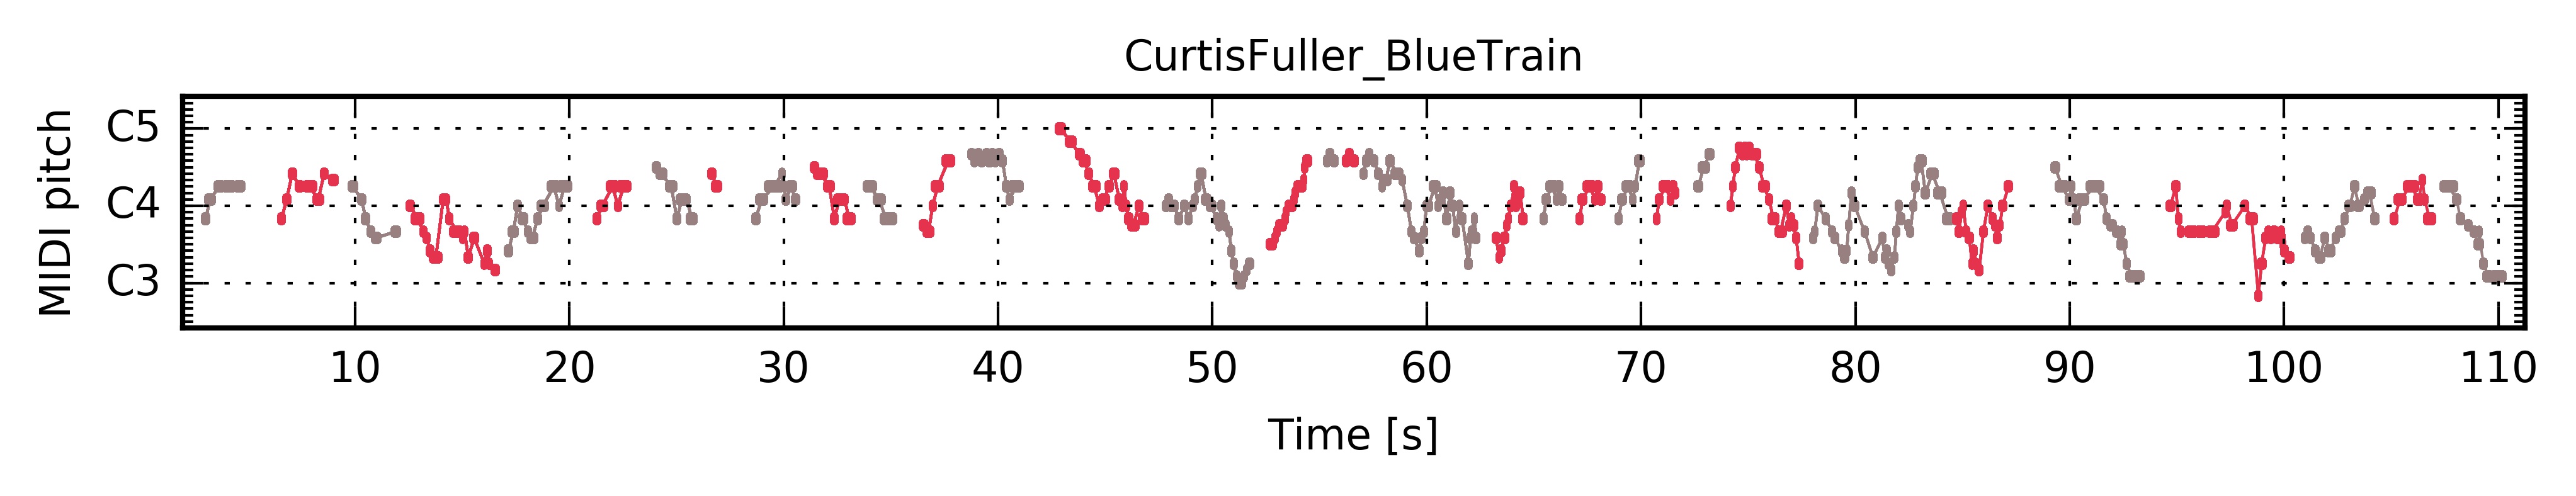 ../../_images/PianoRoll_CurtisFuller_BlueTrain.jpg